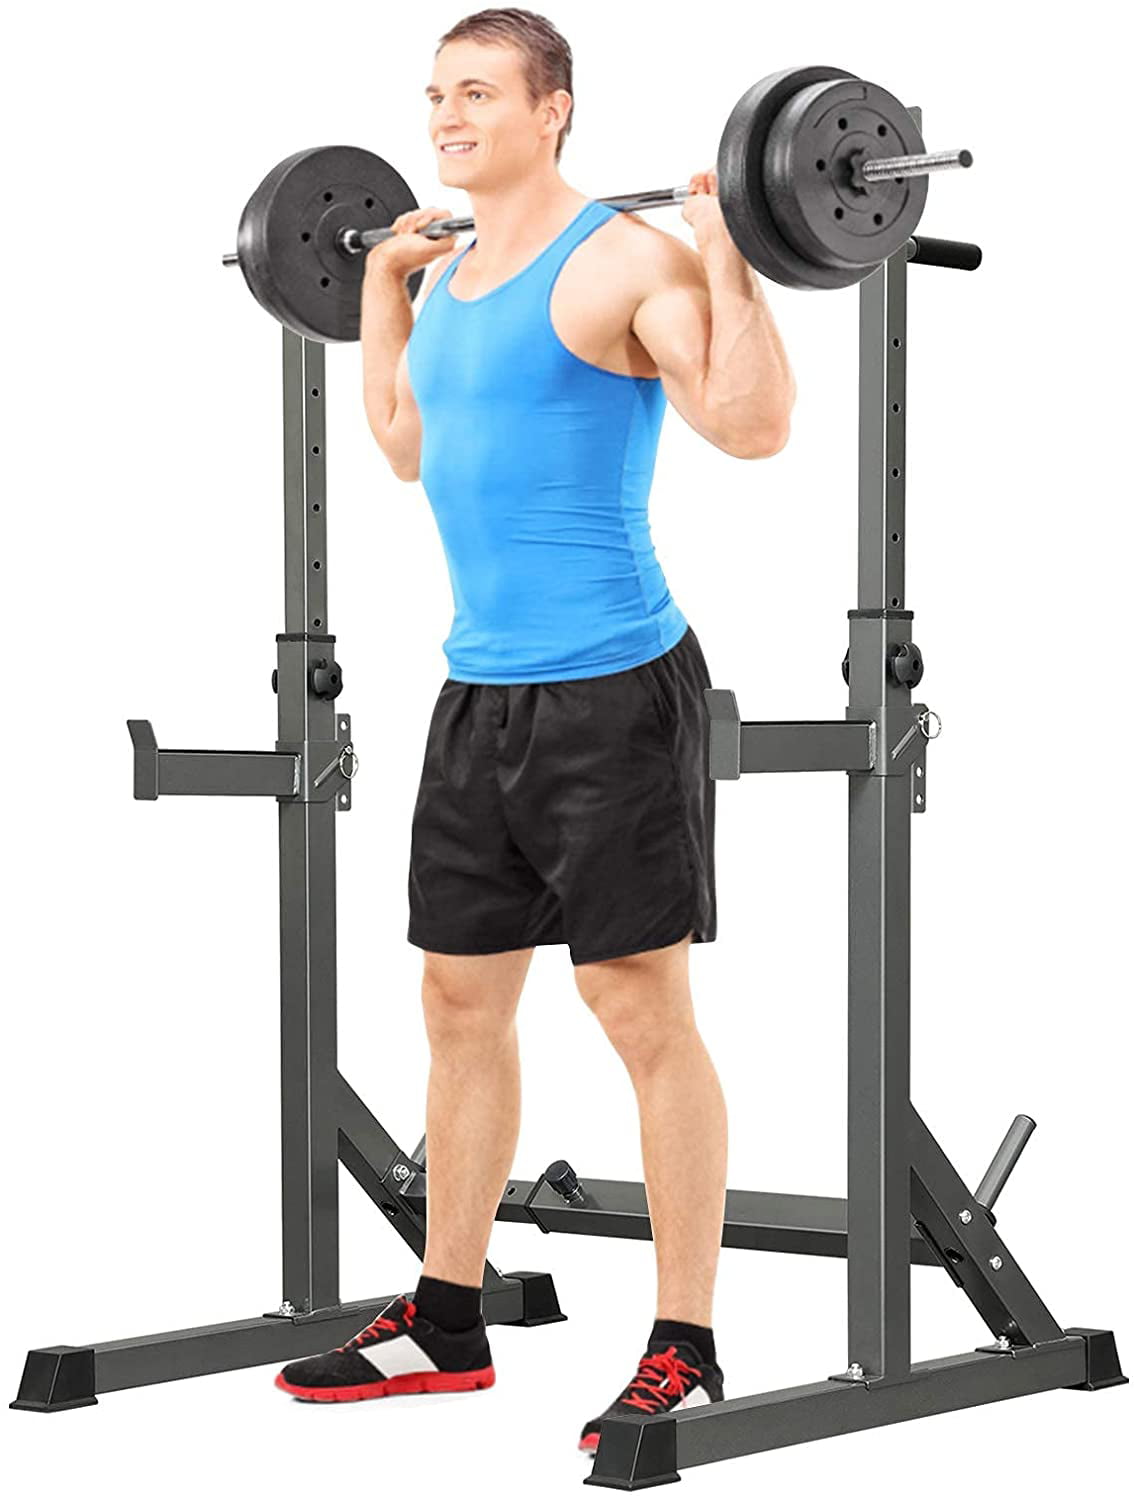 Weights Gym Fitness Adjustable Squatting Frame 